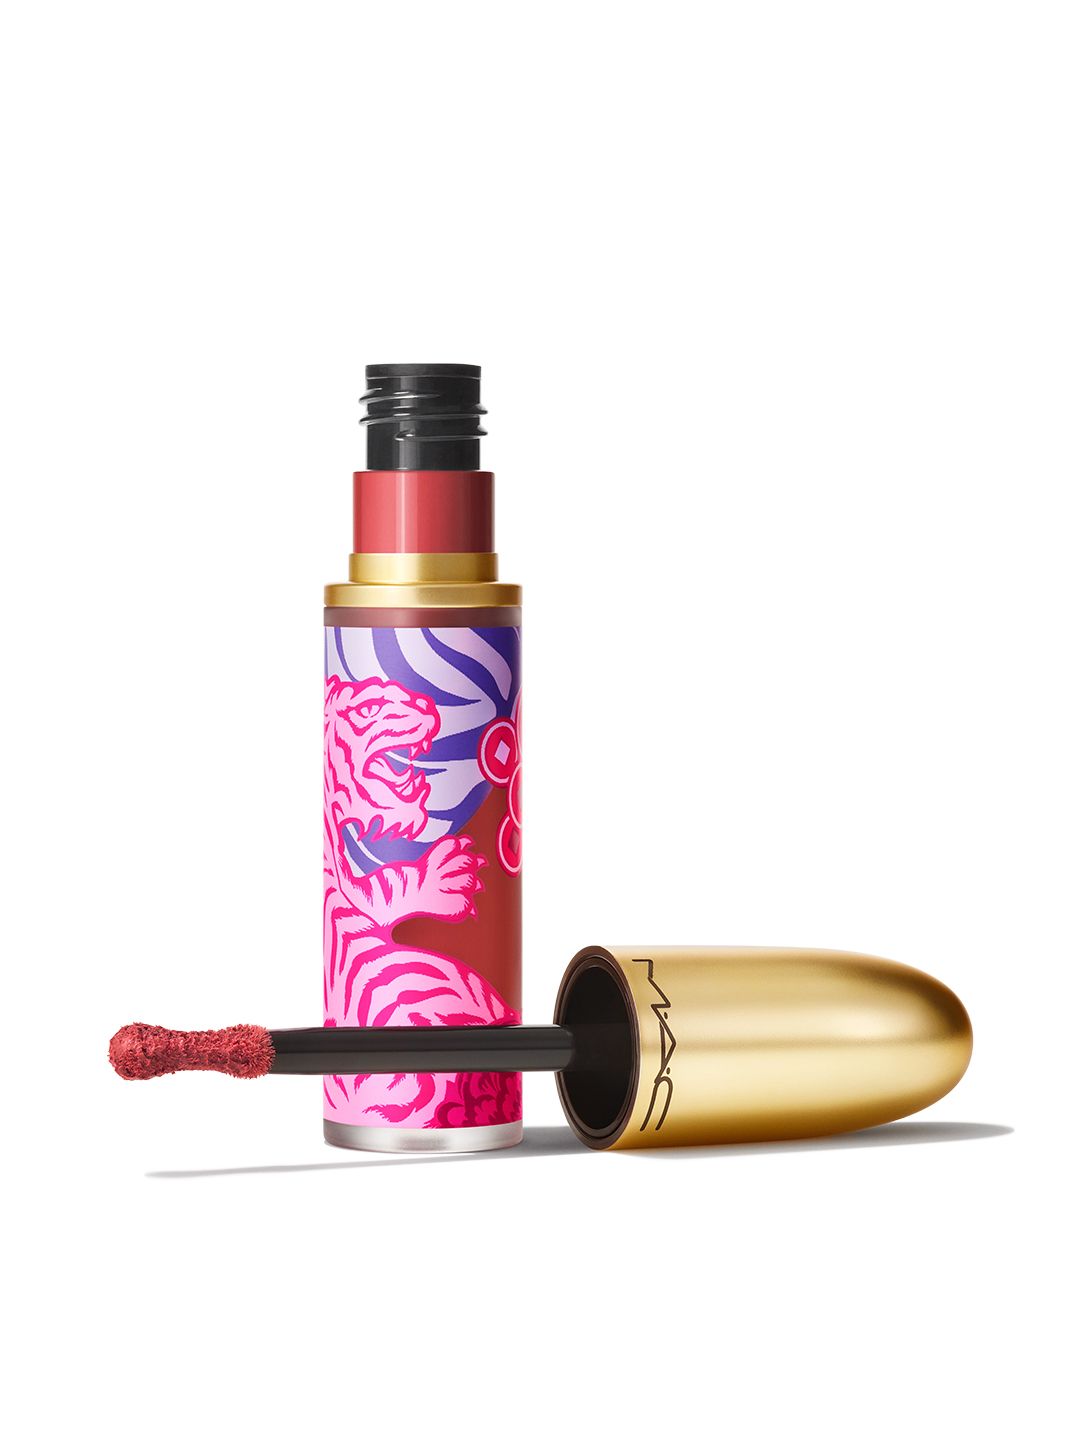 M.A.C Powder Kiss Liquid Lipstick - Luck Be A Lotus Price in India